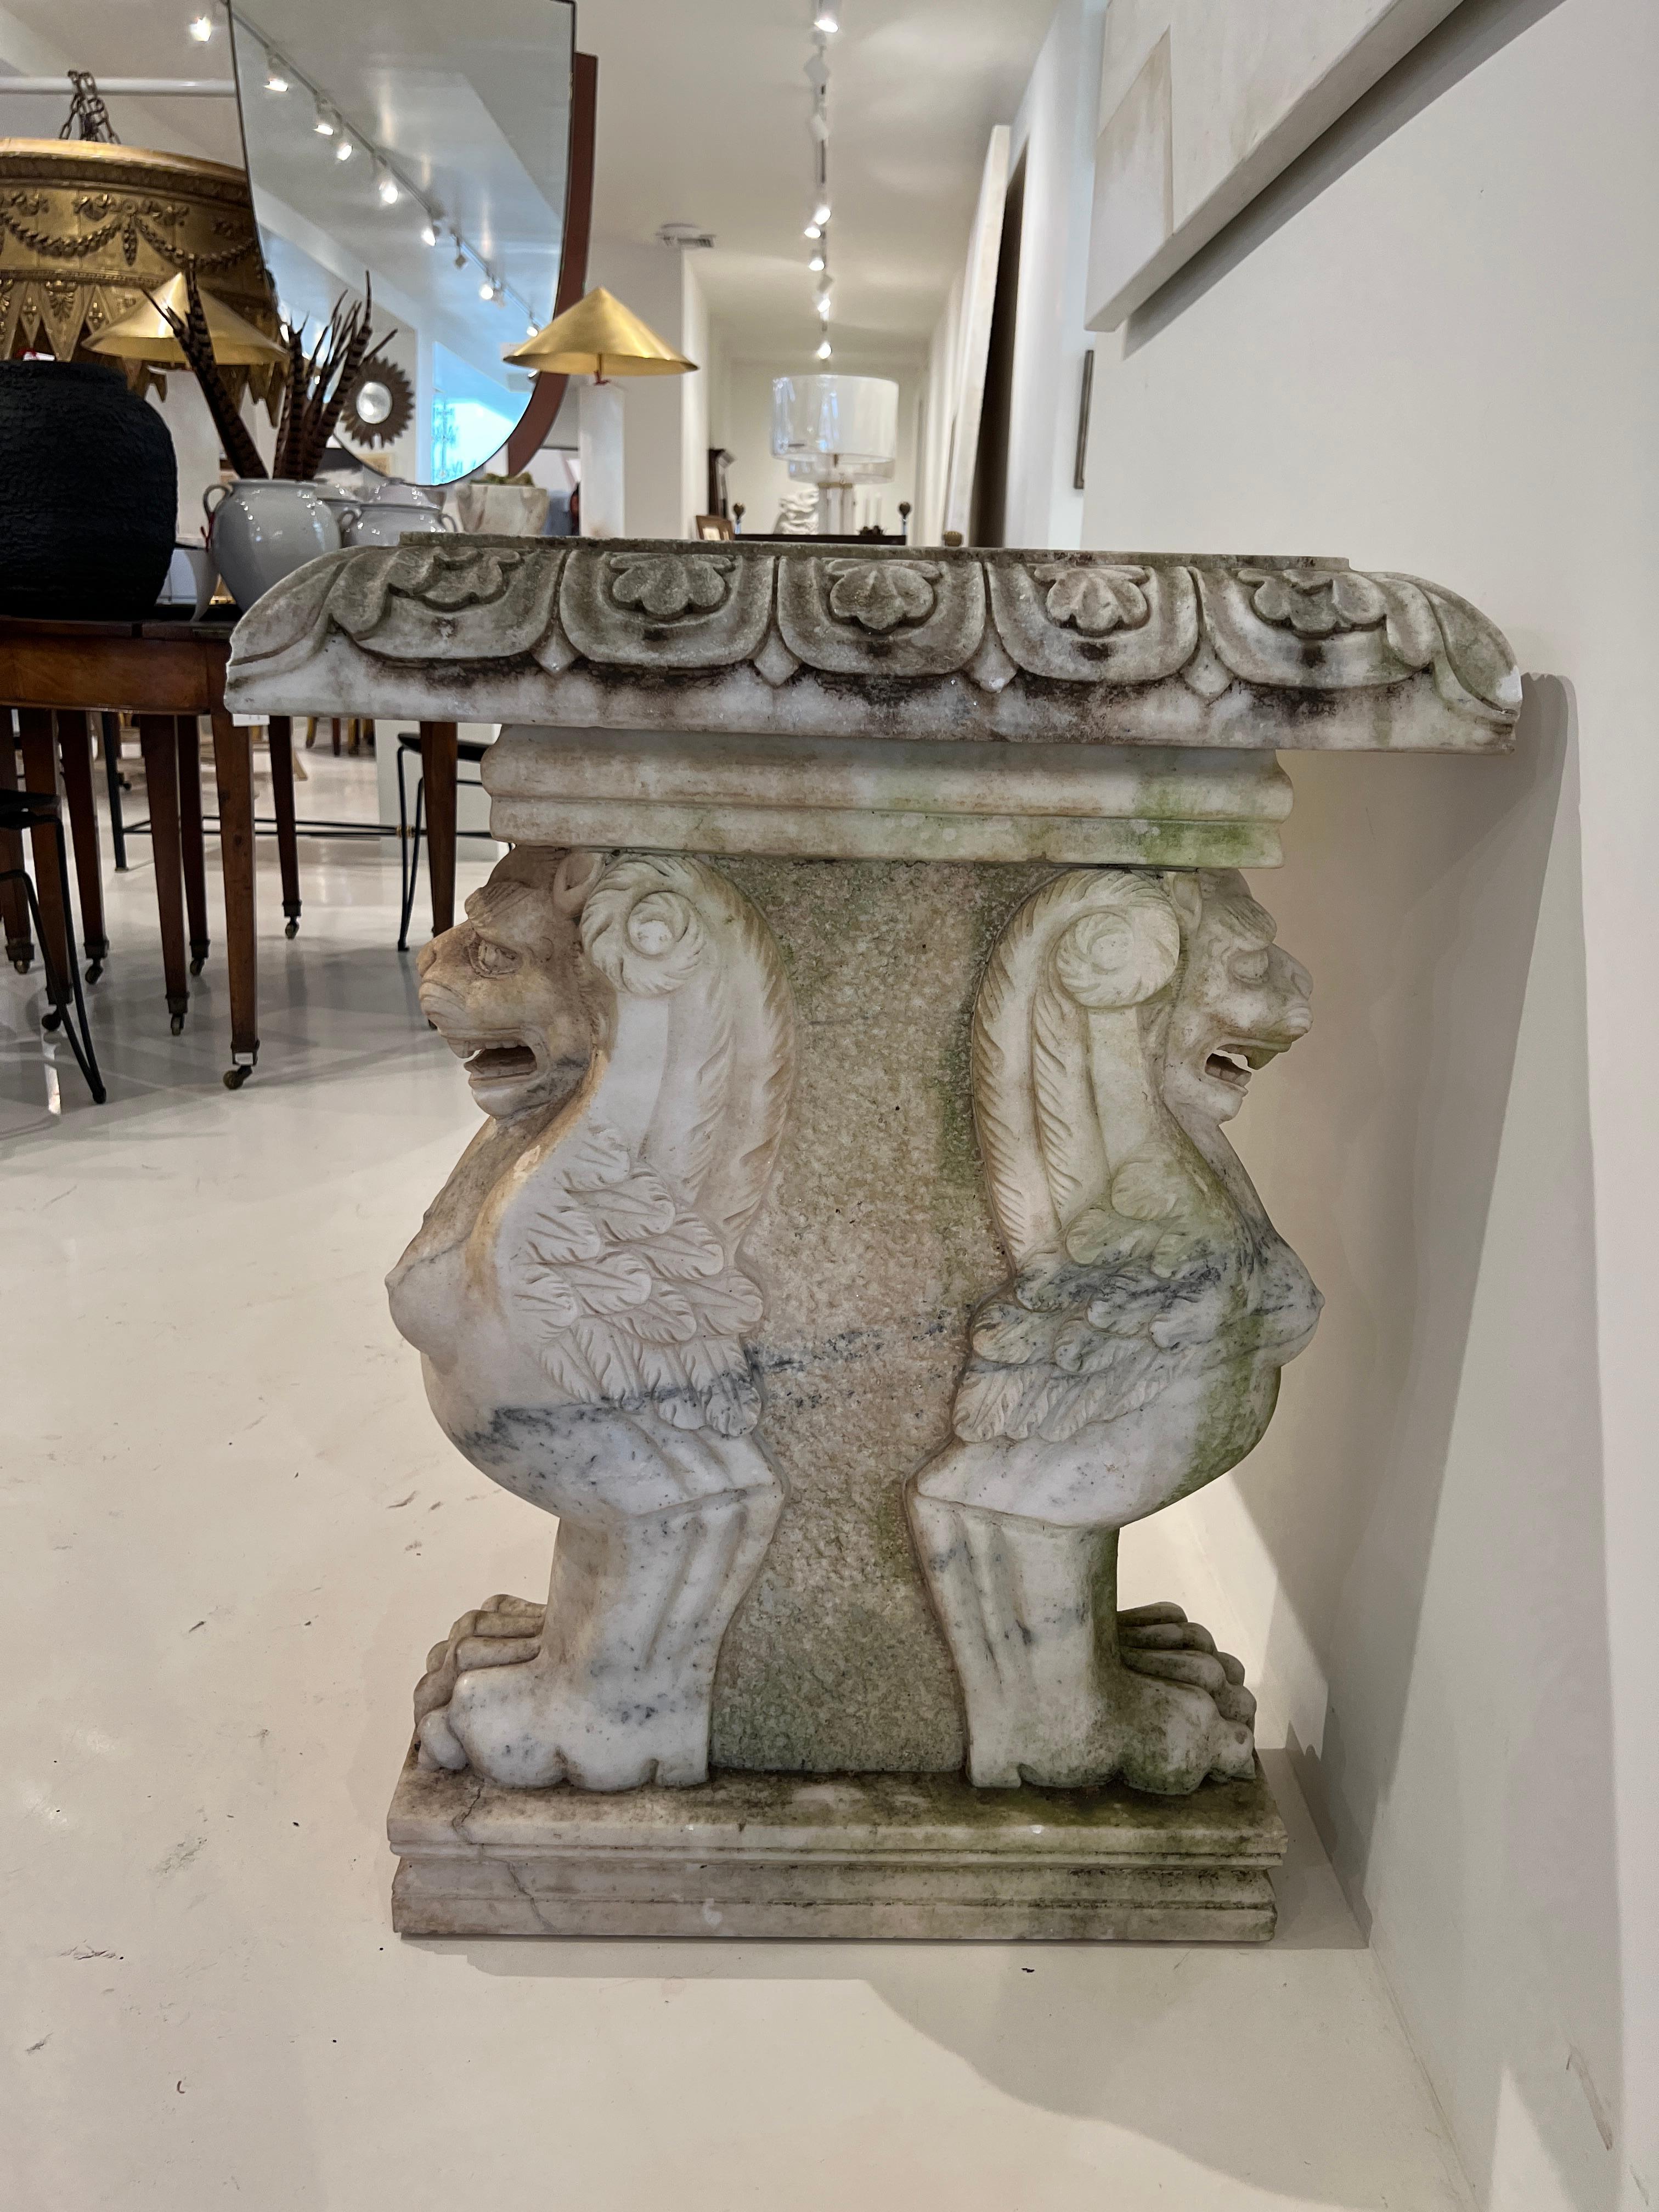 A real scene stealer. This magnificent table is solid marble from top to bottom. The base features winged lions with huge claws.. This is repeated on both sides so it can be floated in the room. Some cracks, discoloration and losses in areas.